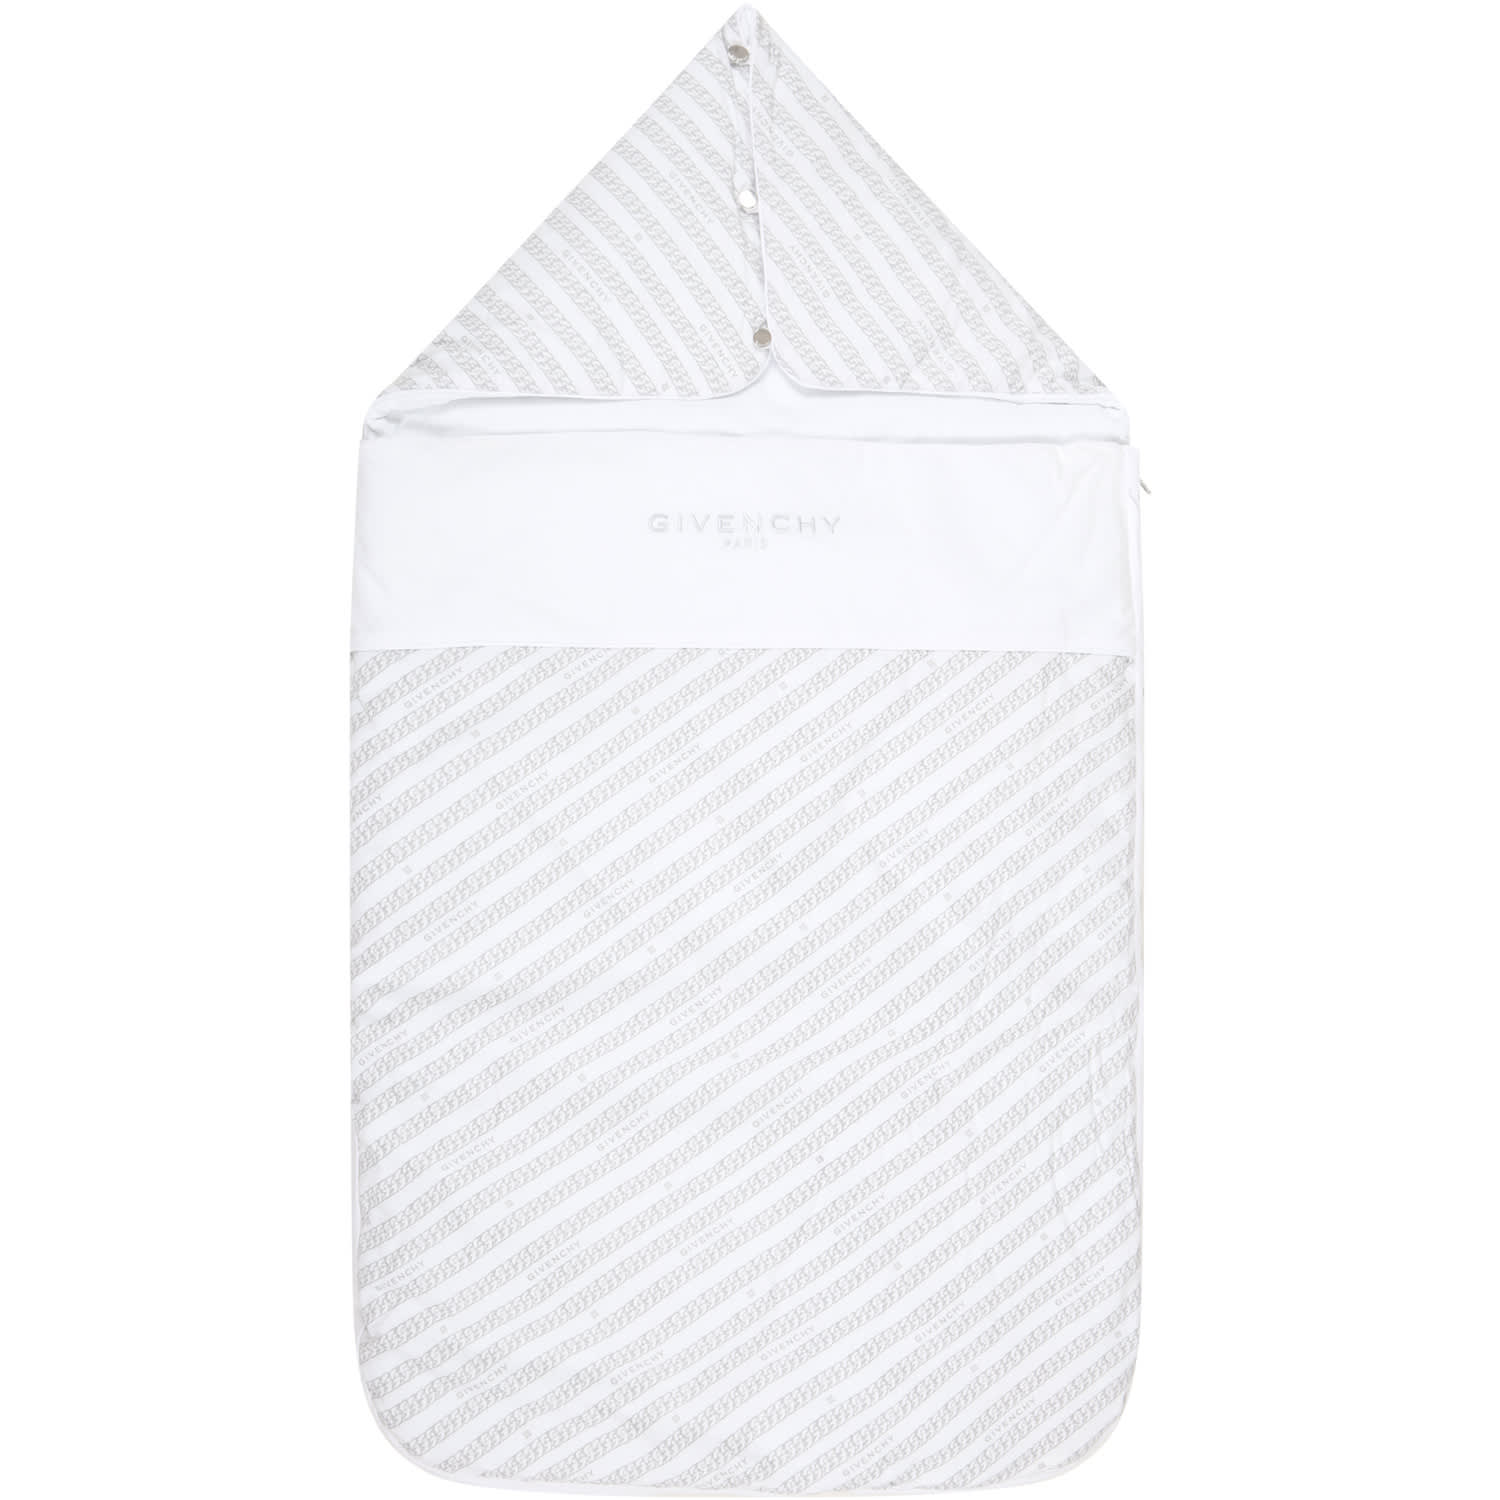 Givenchy White Sleeping Bag For Baby Kids